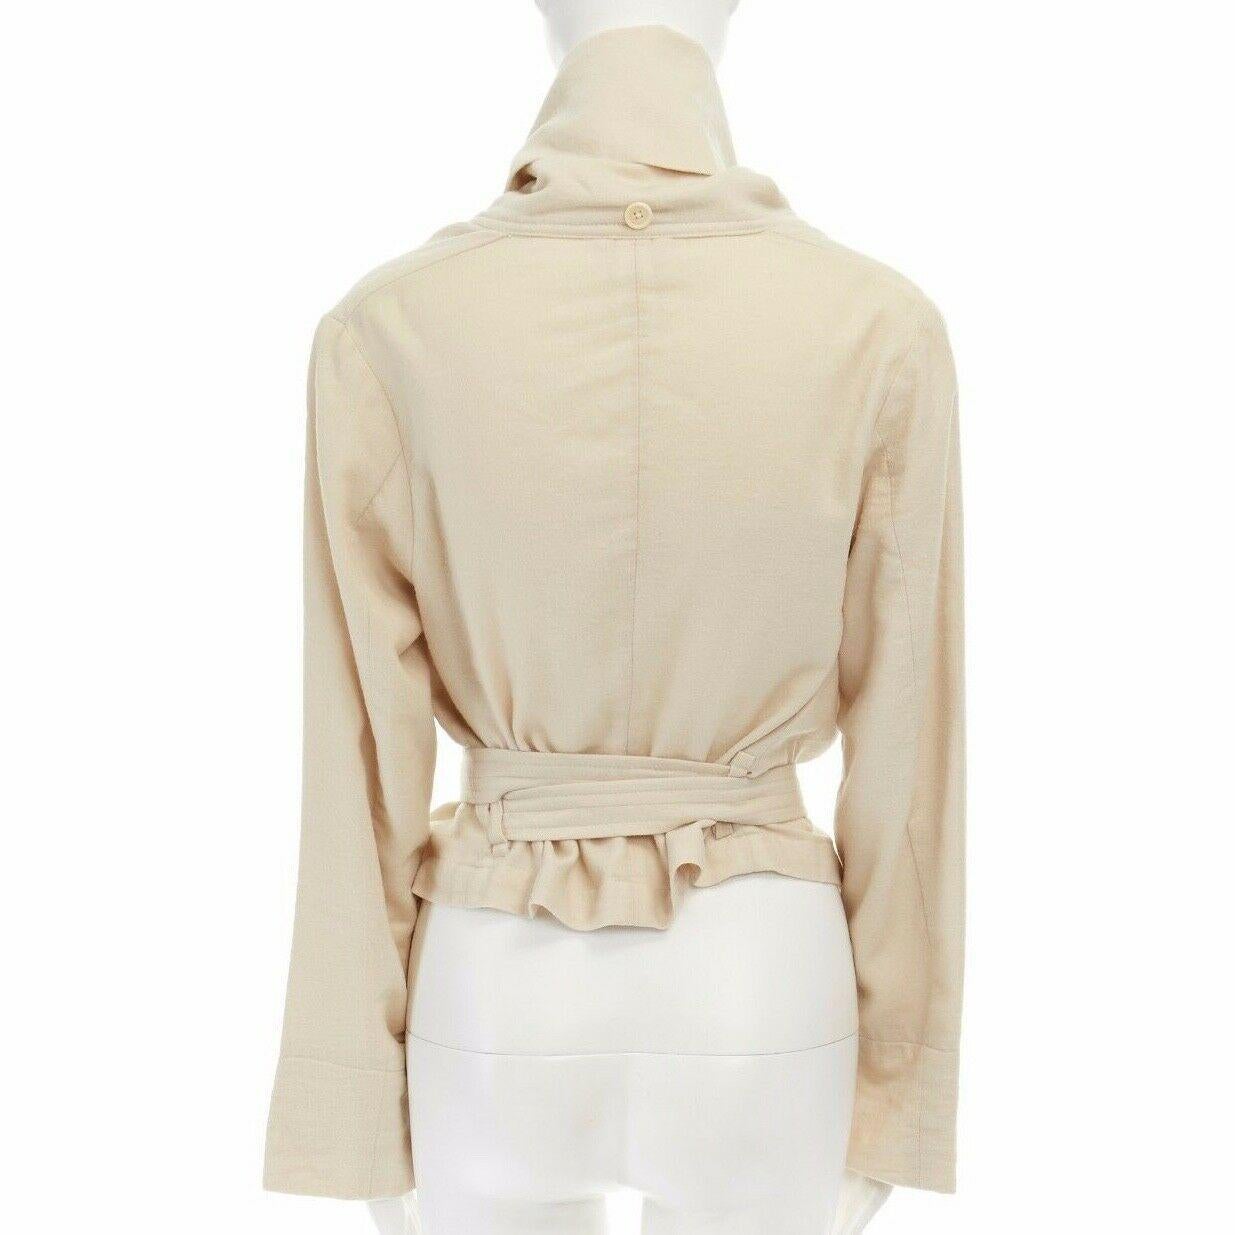 ANN DEMEULEMEESTER beige wool linen draped collar belted oversized jacket FR36 S

ANN DEMEULEMEESTER Wool, linen. Cream. Button front closure. Draped collar. Dual slanted front pocket. Dropped shoulder seam. Loose cut sleeves. Attached belt at back.